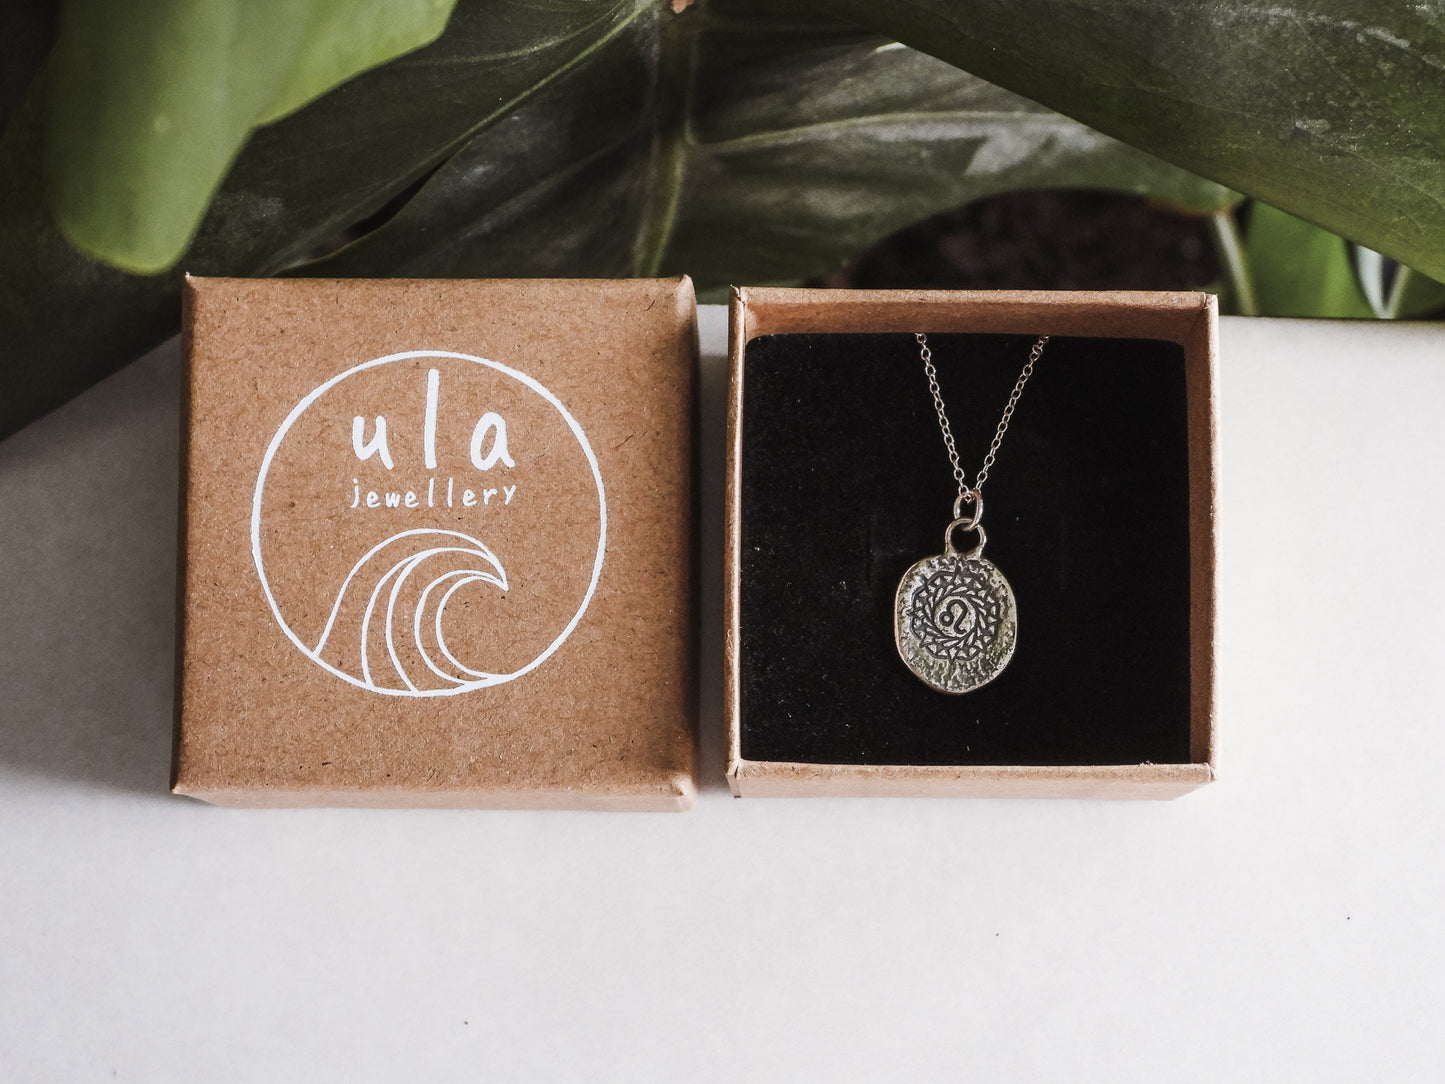 leo engraved dainty coin pendant necklace in ula jewellery box